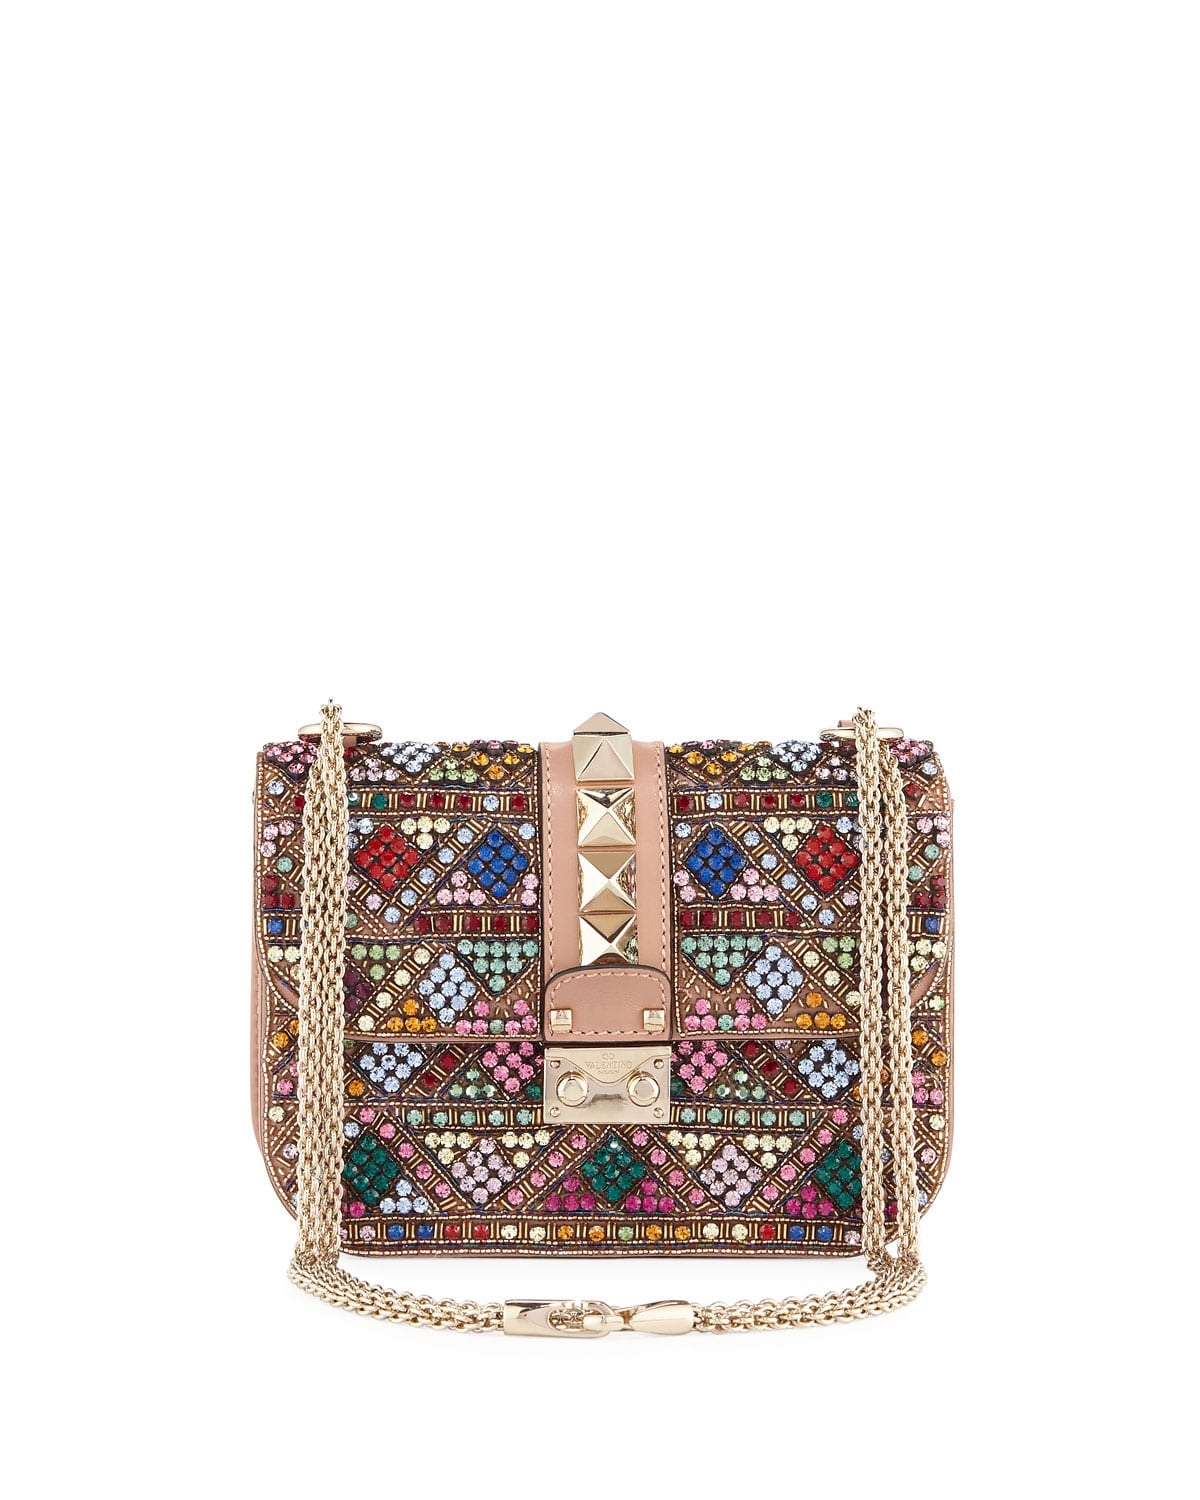 Valentino Bag Best Price In Pakistan, Rs 2200